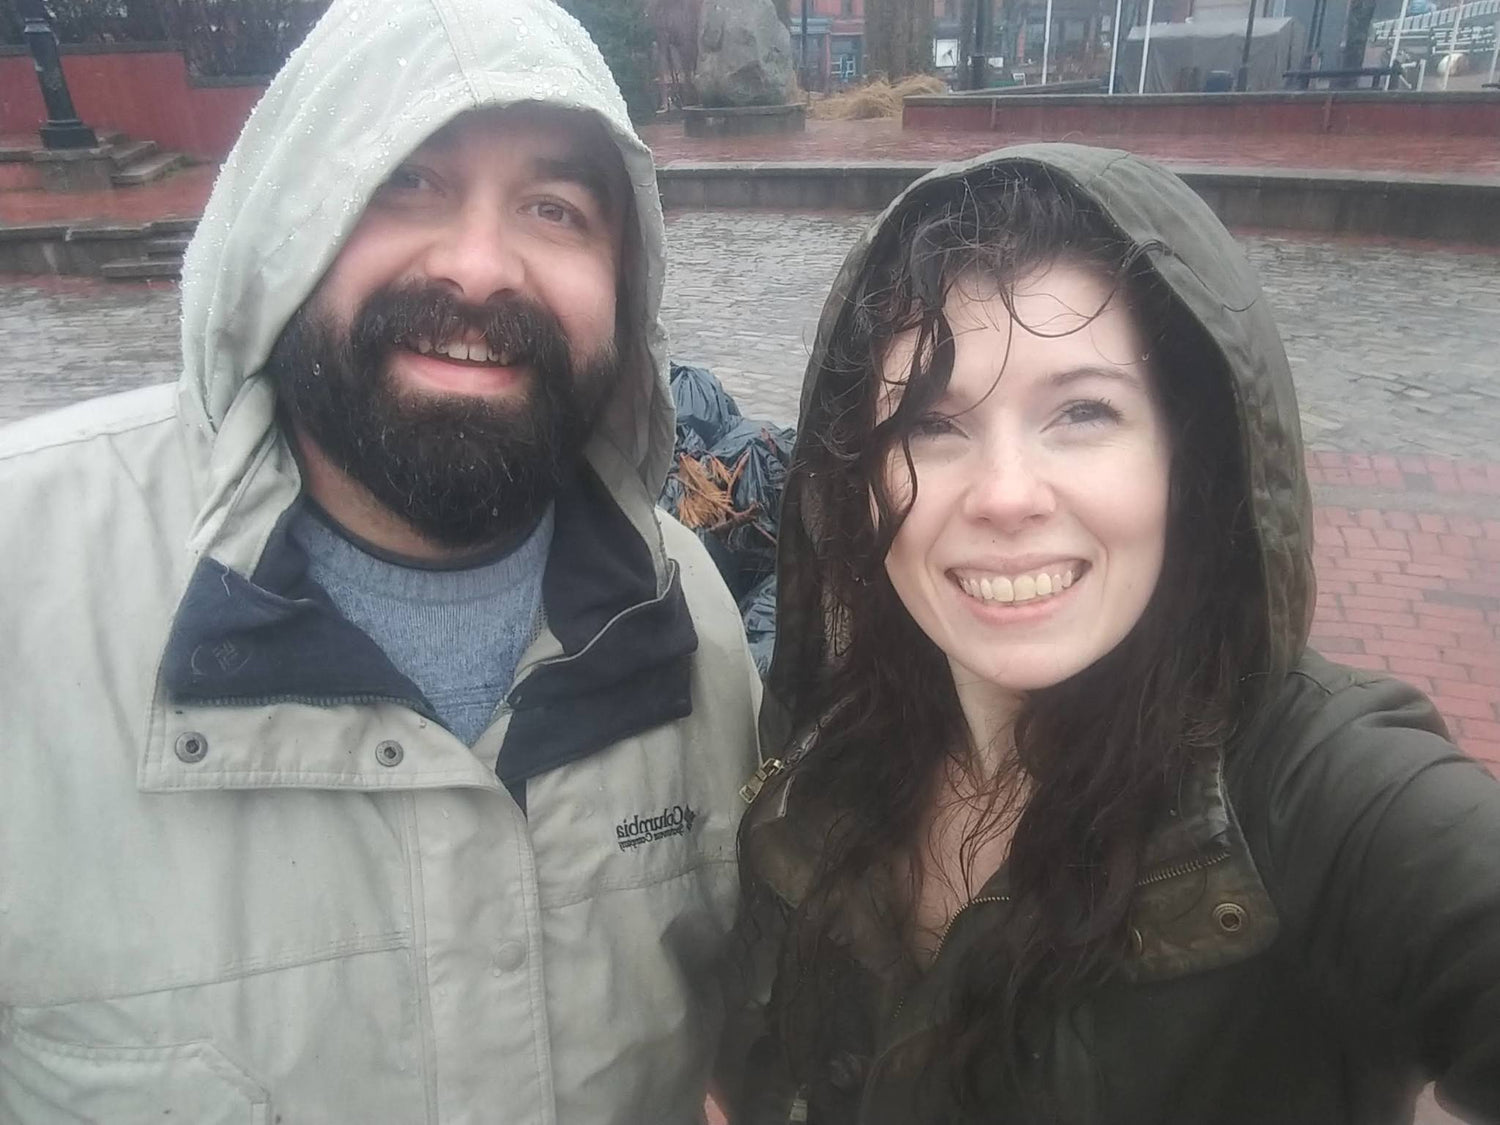 Bubbles & Balms Cofounders attending a community cleanup in the rain.